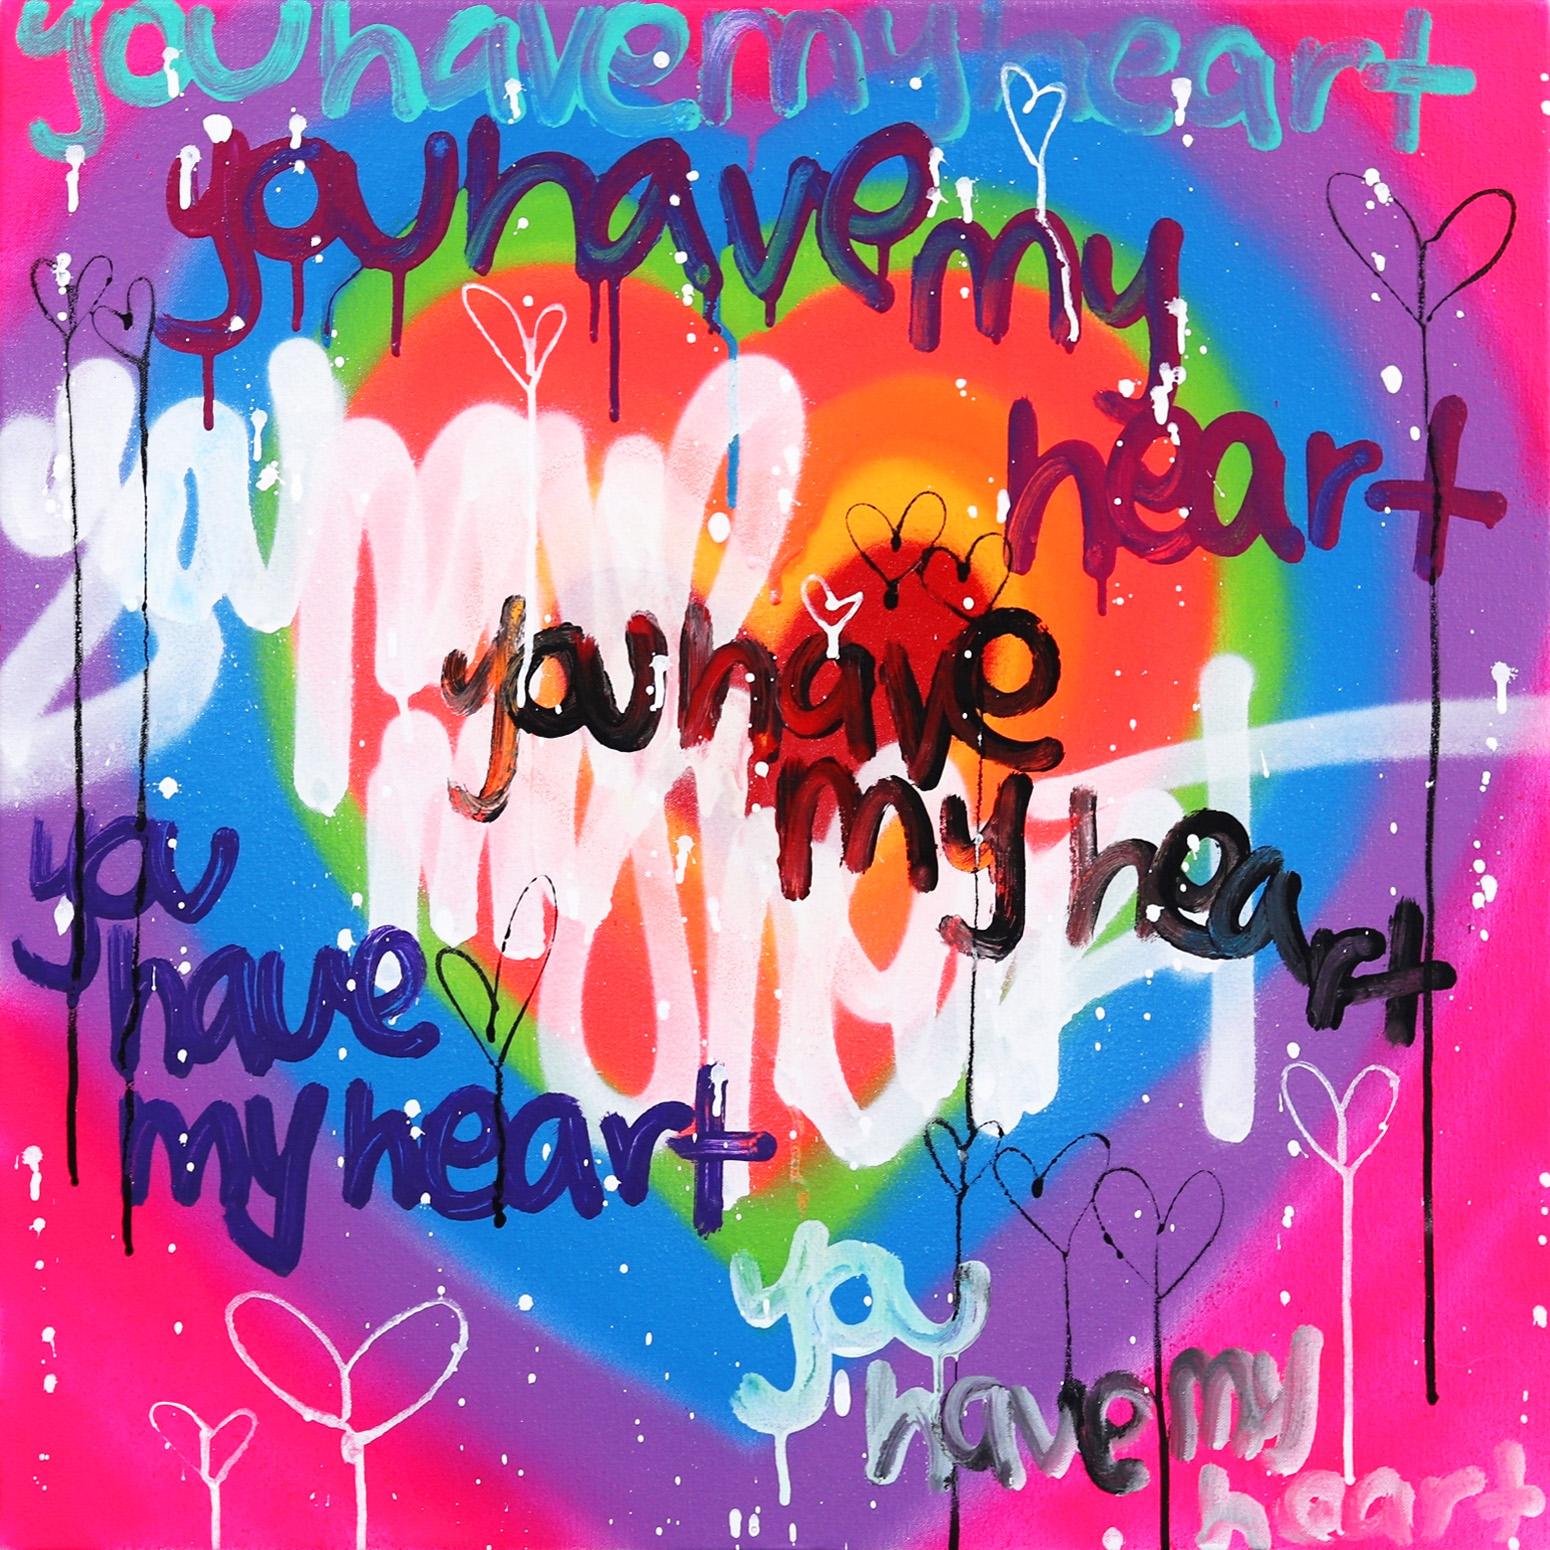 You Have My Heart - Mixed Media Art by Amber Goldhammer